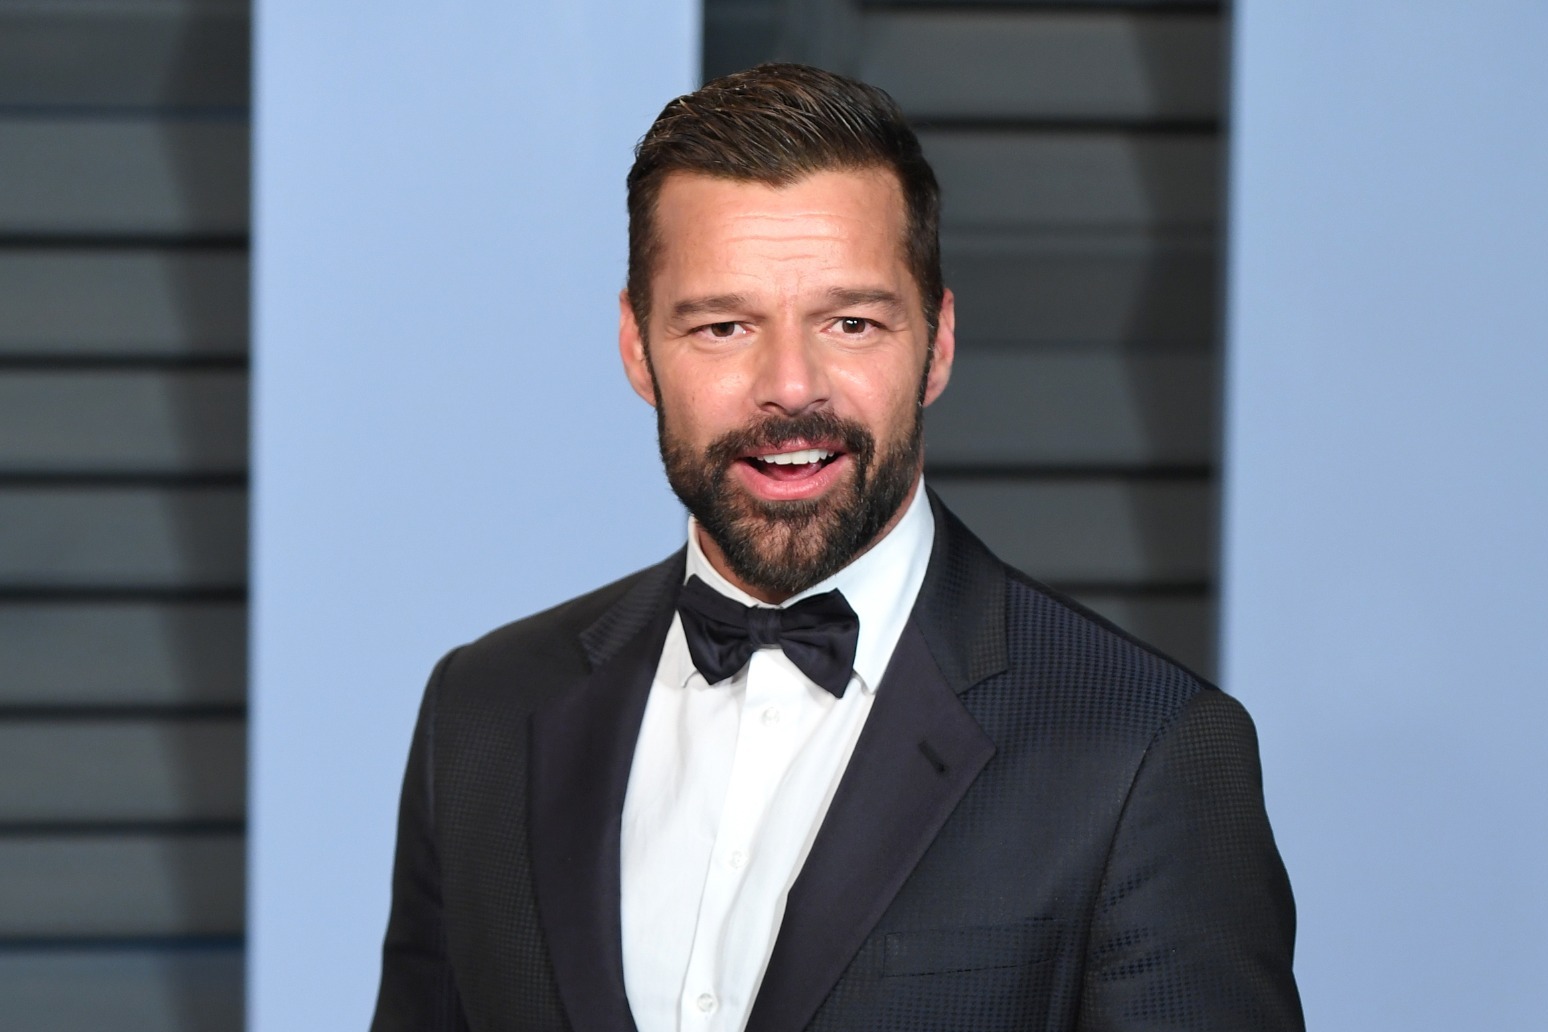 Restraining order against Ricky Martin reportedly filed by family member 